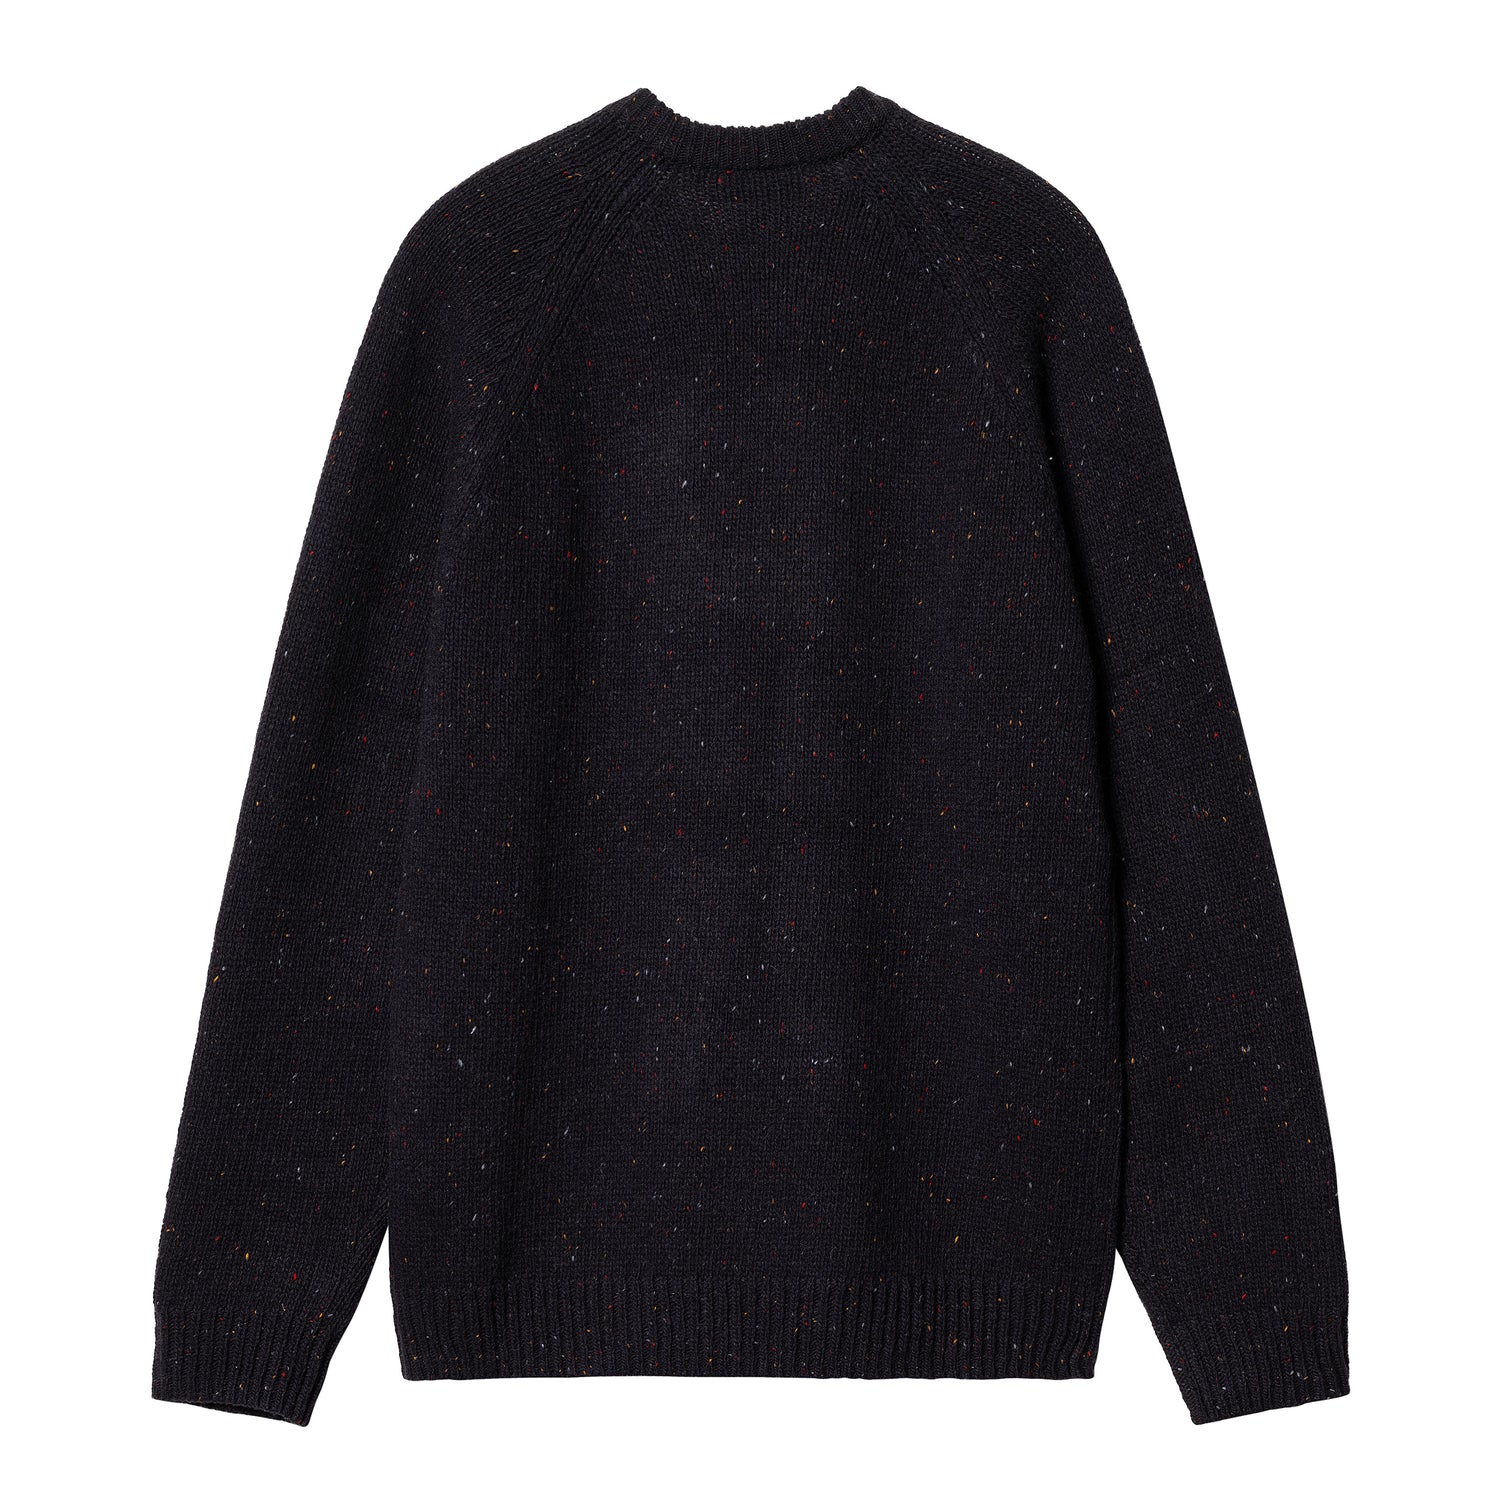 ANGLISTIC SWEATER SPECKLED DARK NAVY